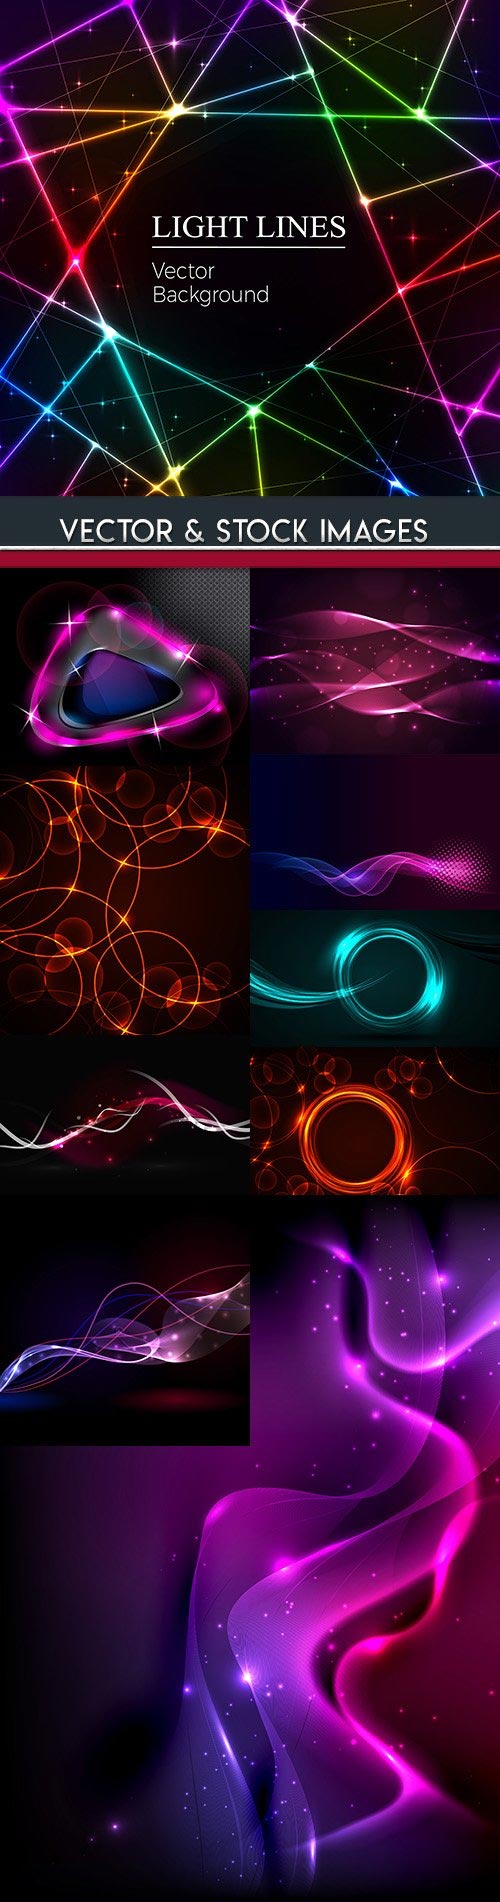 Lighting effect and neon abstract backgrounds